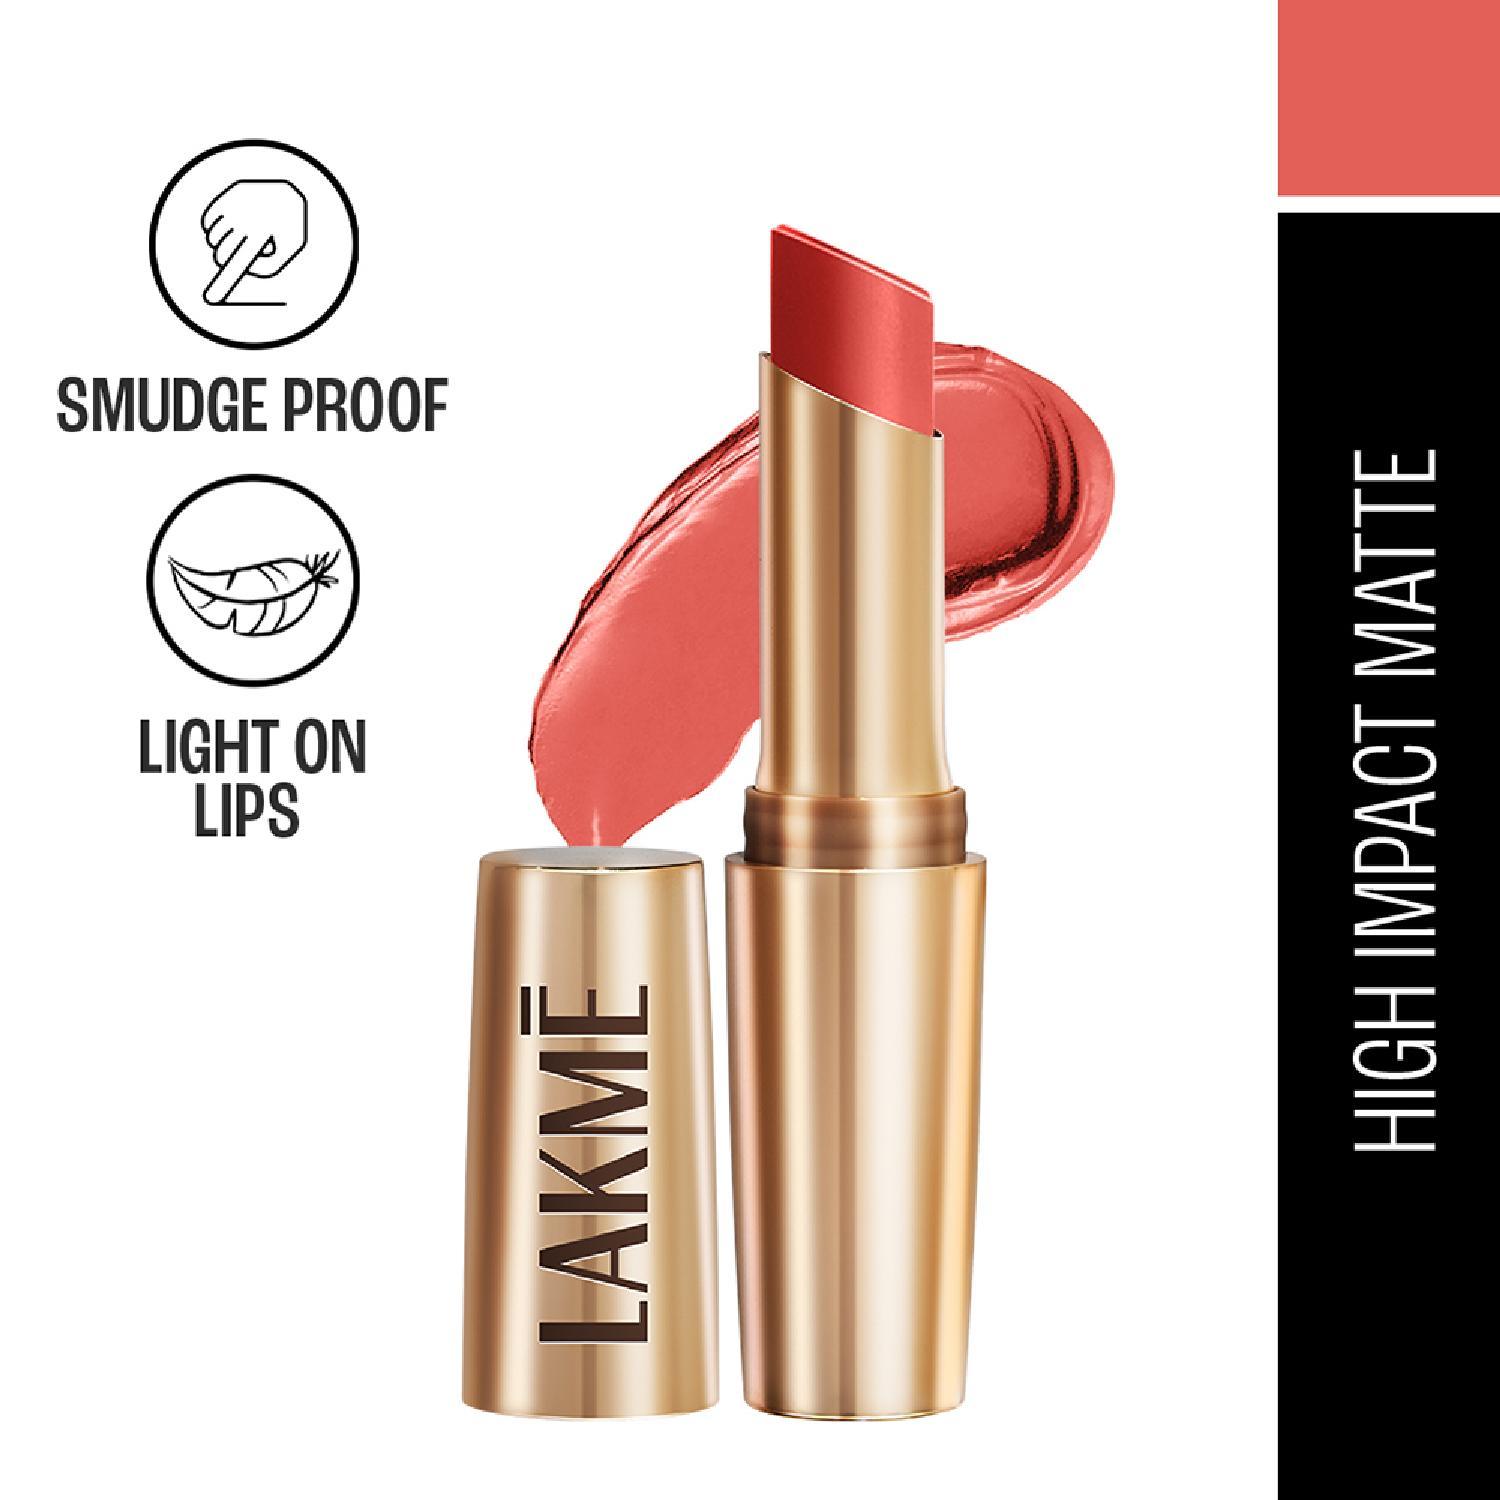 Lakme | Lakme 9 to 5 Powerplay Priming Matte Lipstick, Lasts 16hrs, Coral Date (3.6g)